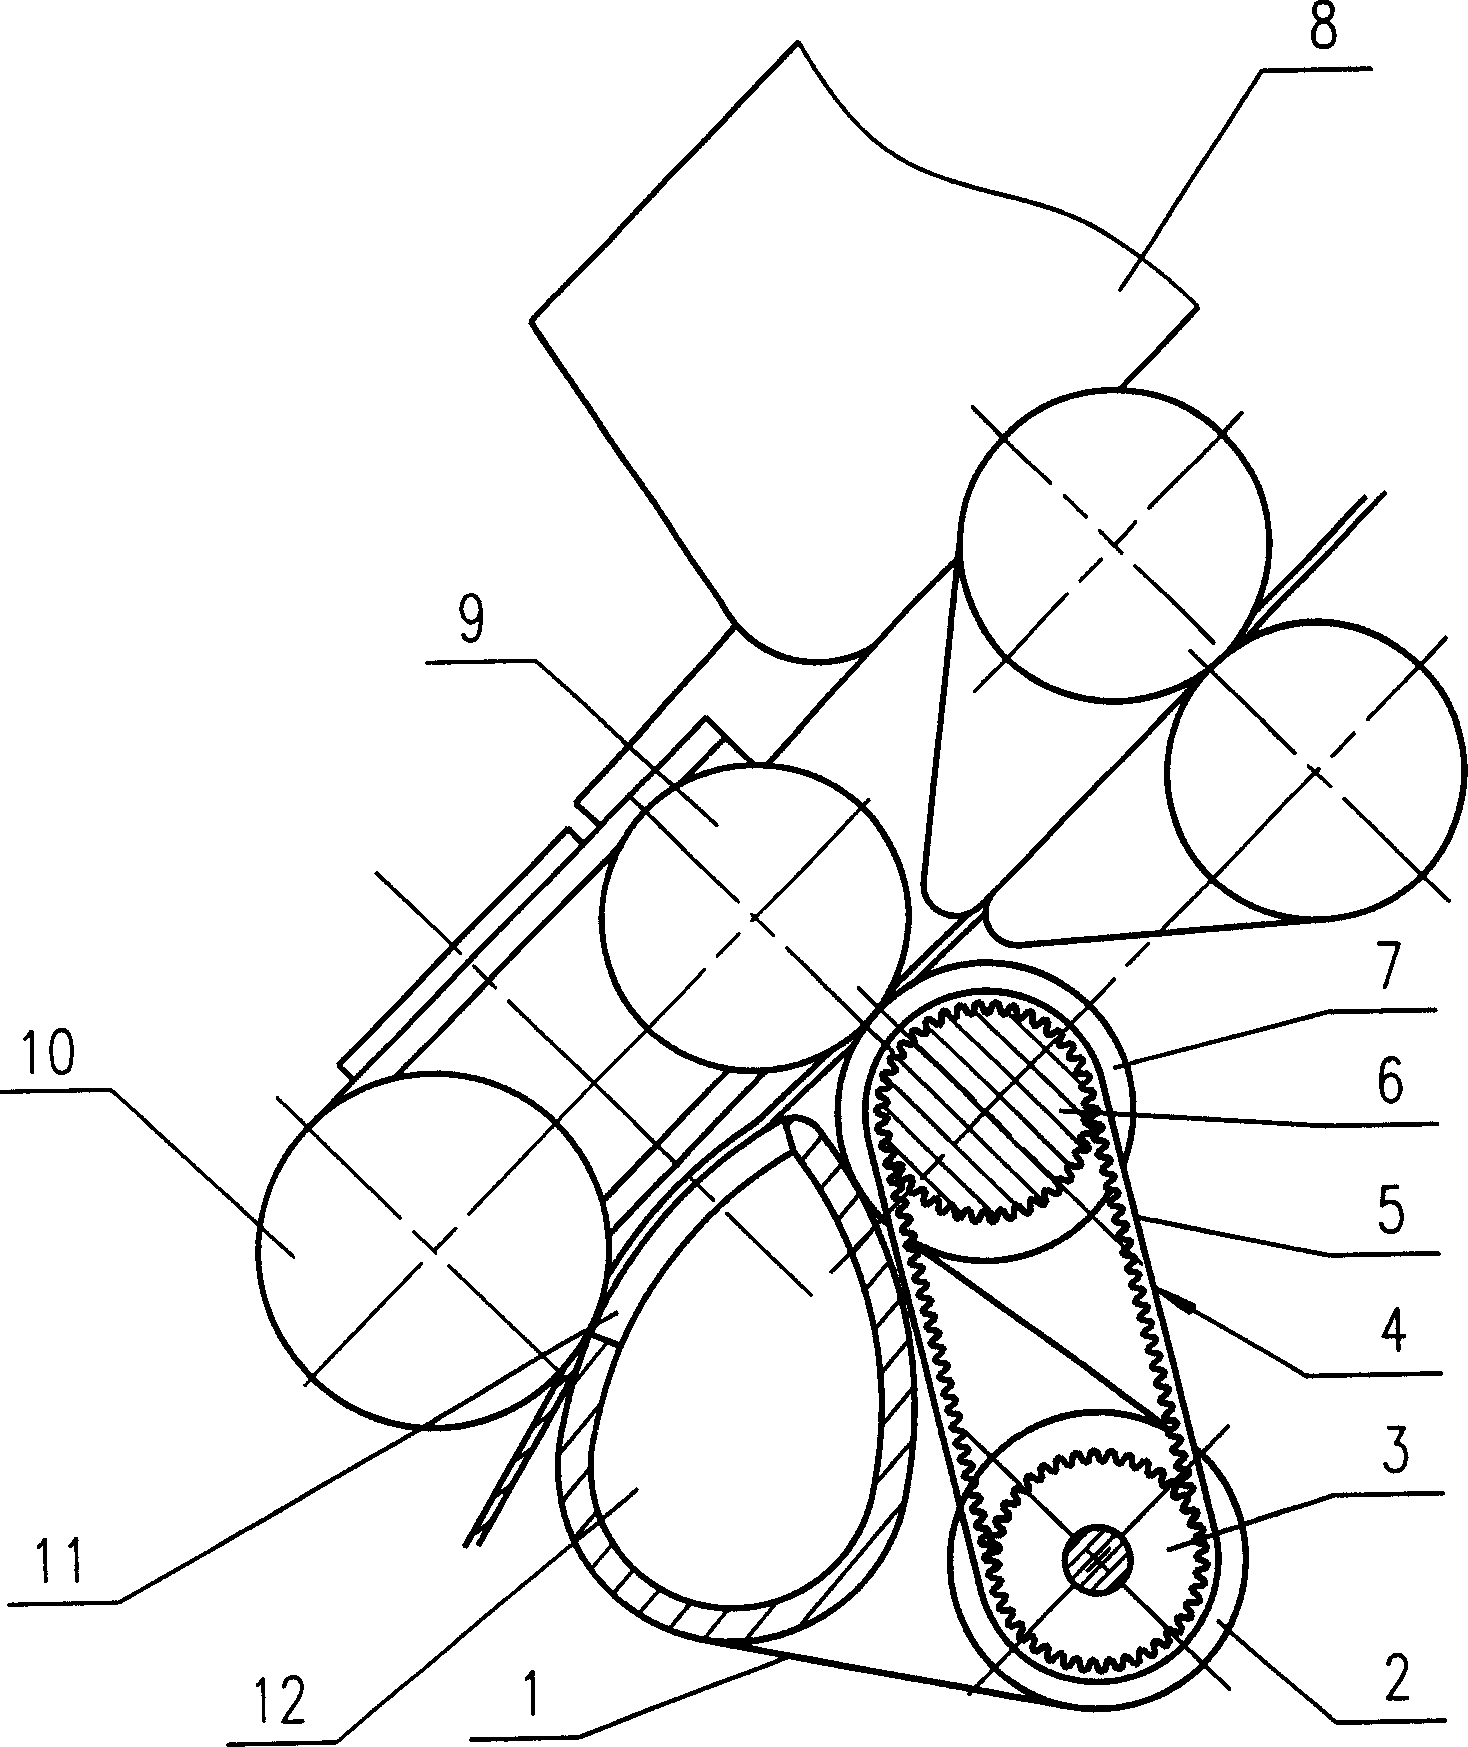 Fiber collecting device for ring spinning frame